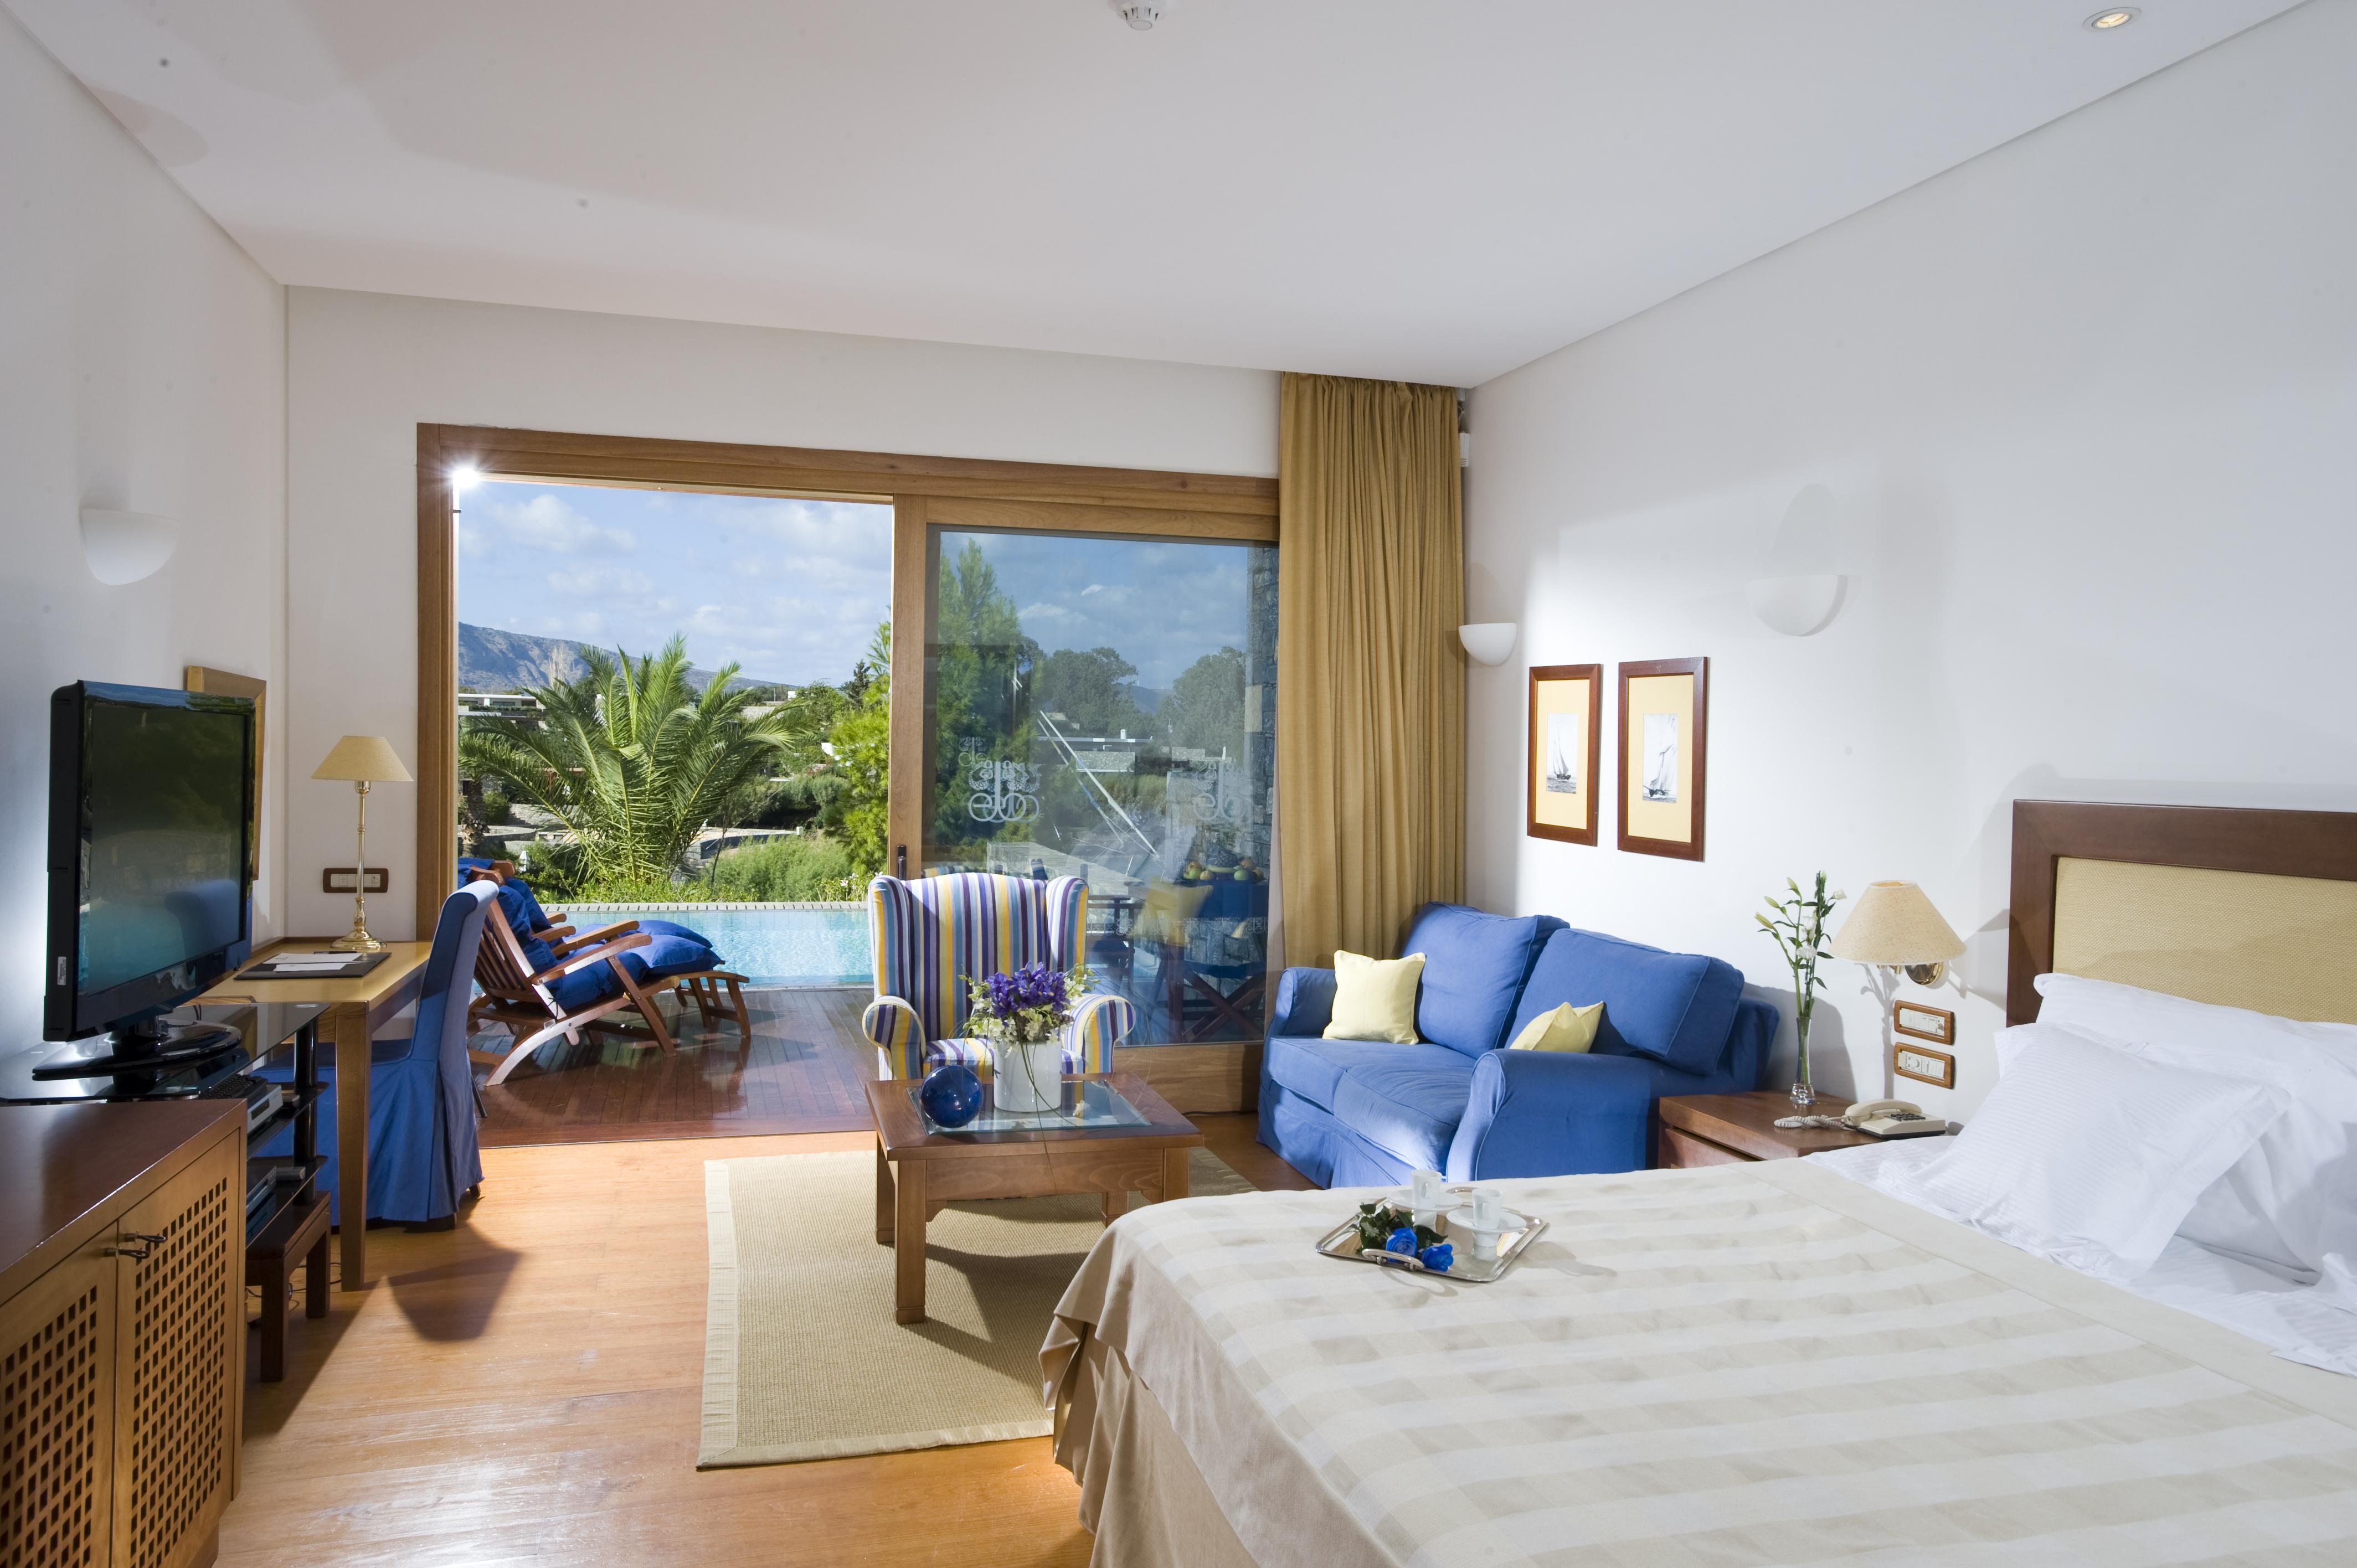 Elounda Bay Palace, A Member Of The Leading Hotels Of The World 외부 사진